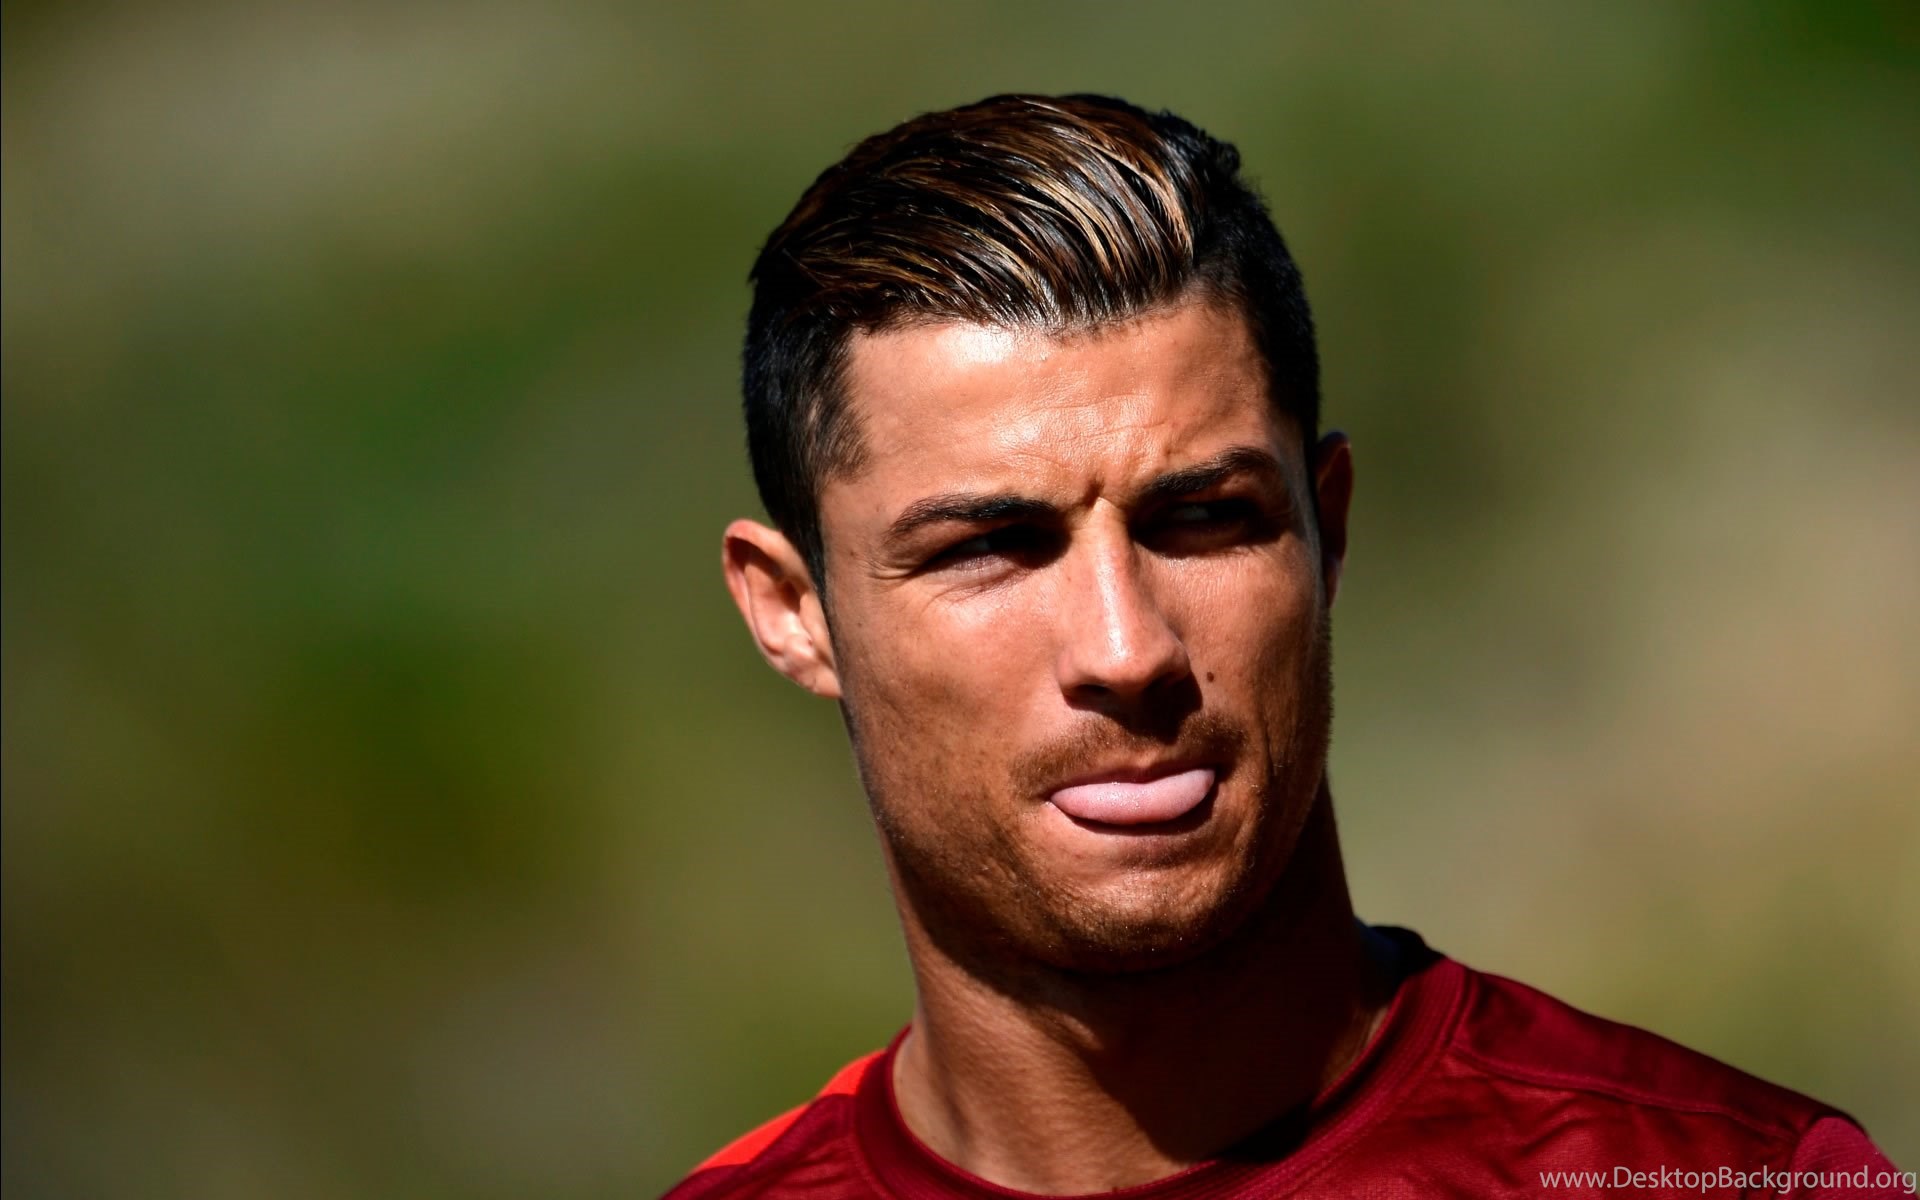 Ronaldo seen from behind with his new hairstyle during the Serie A match at  Allianz Stadium,